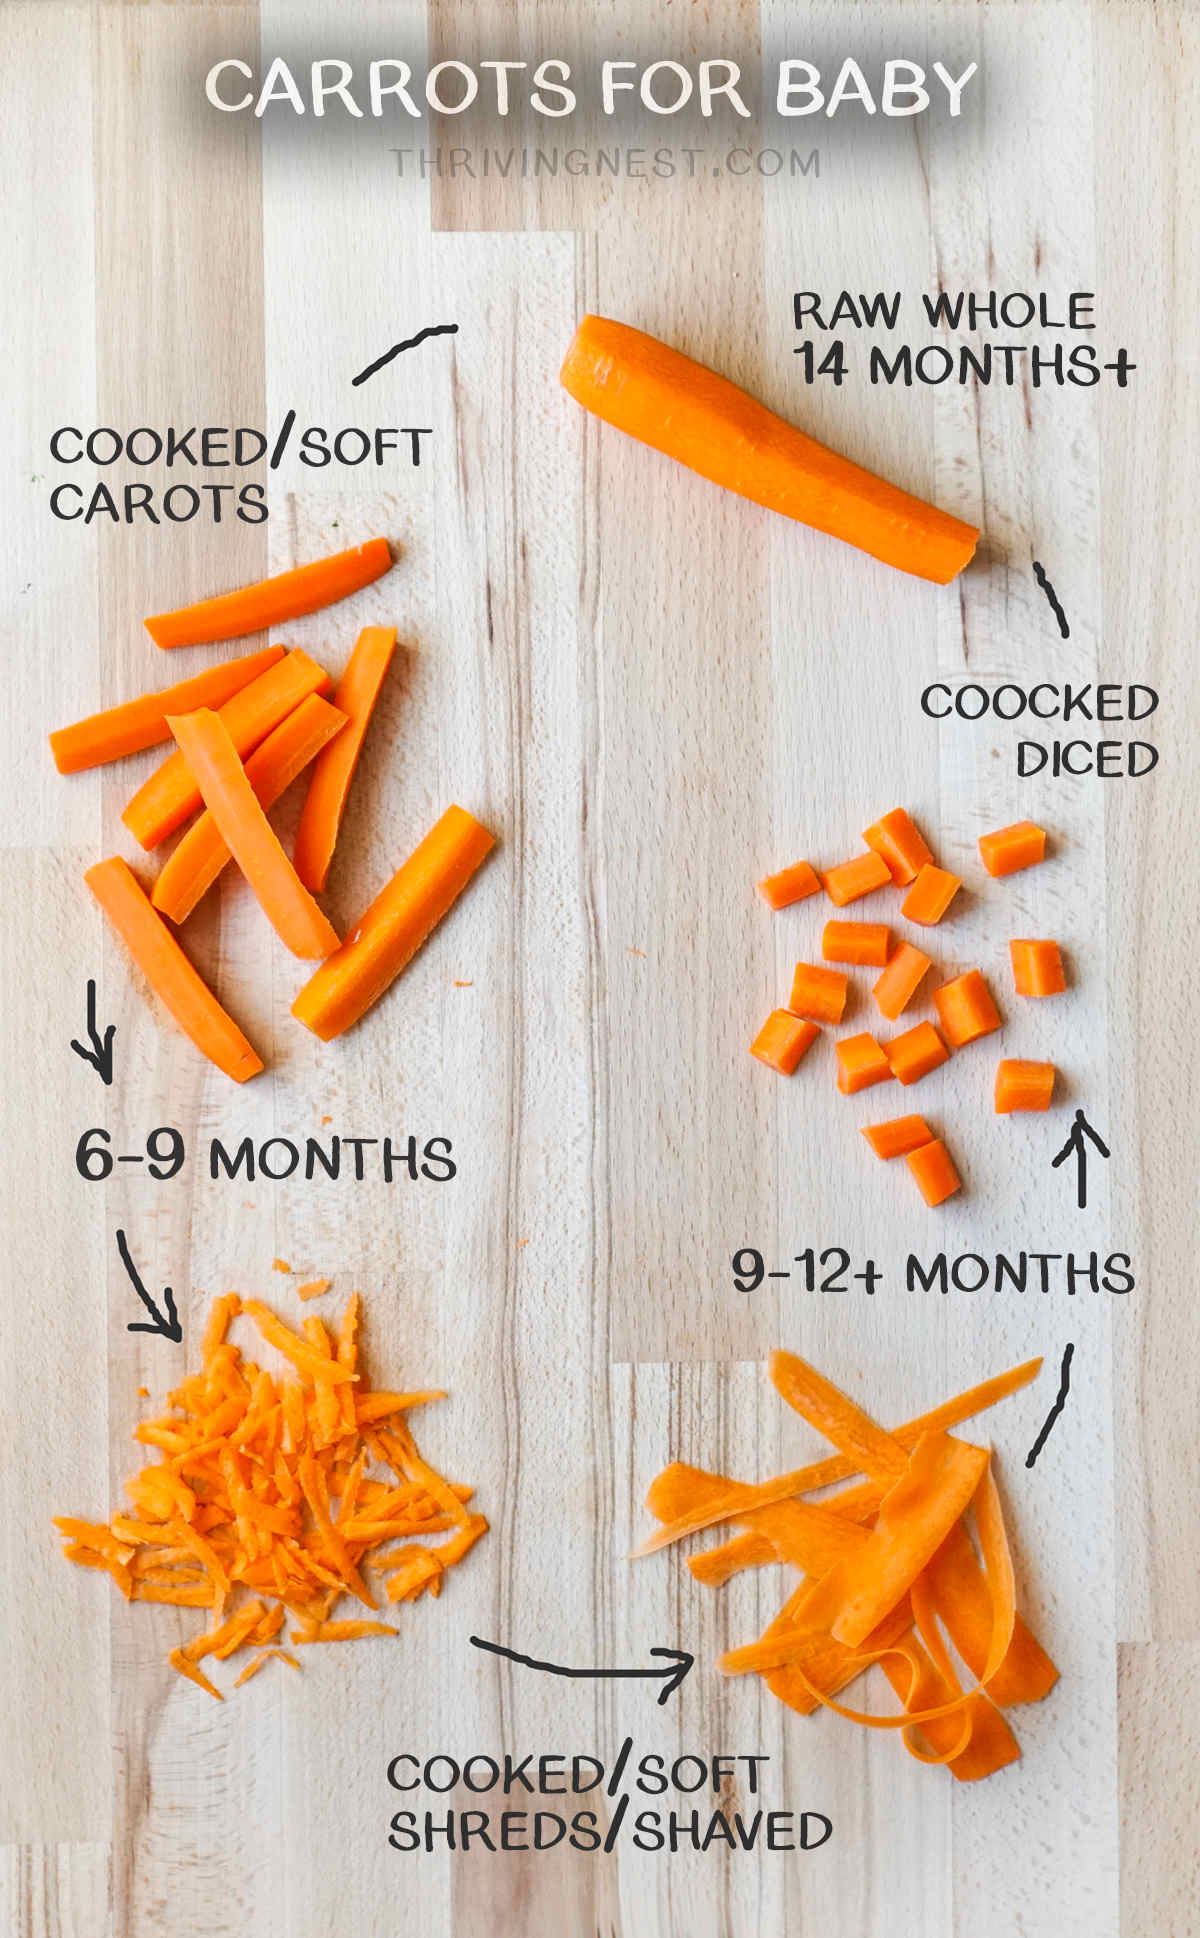 Carrots Baby Led Weaning: How to cut and serve carrots to babies by age. #babyledweaning #carrots